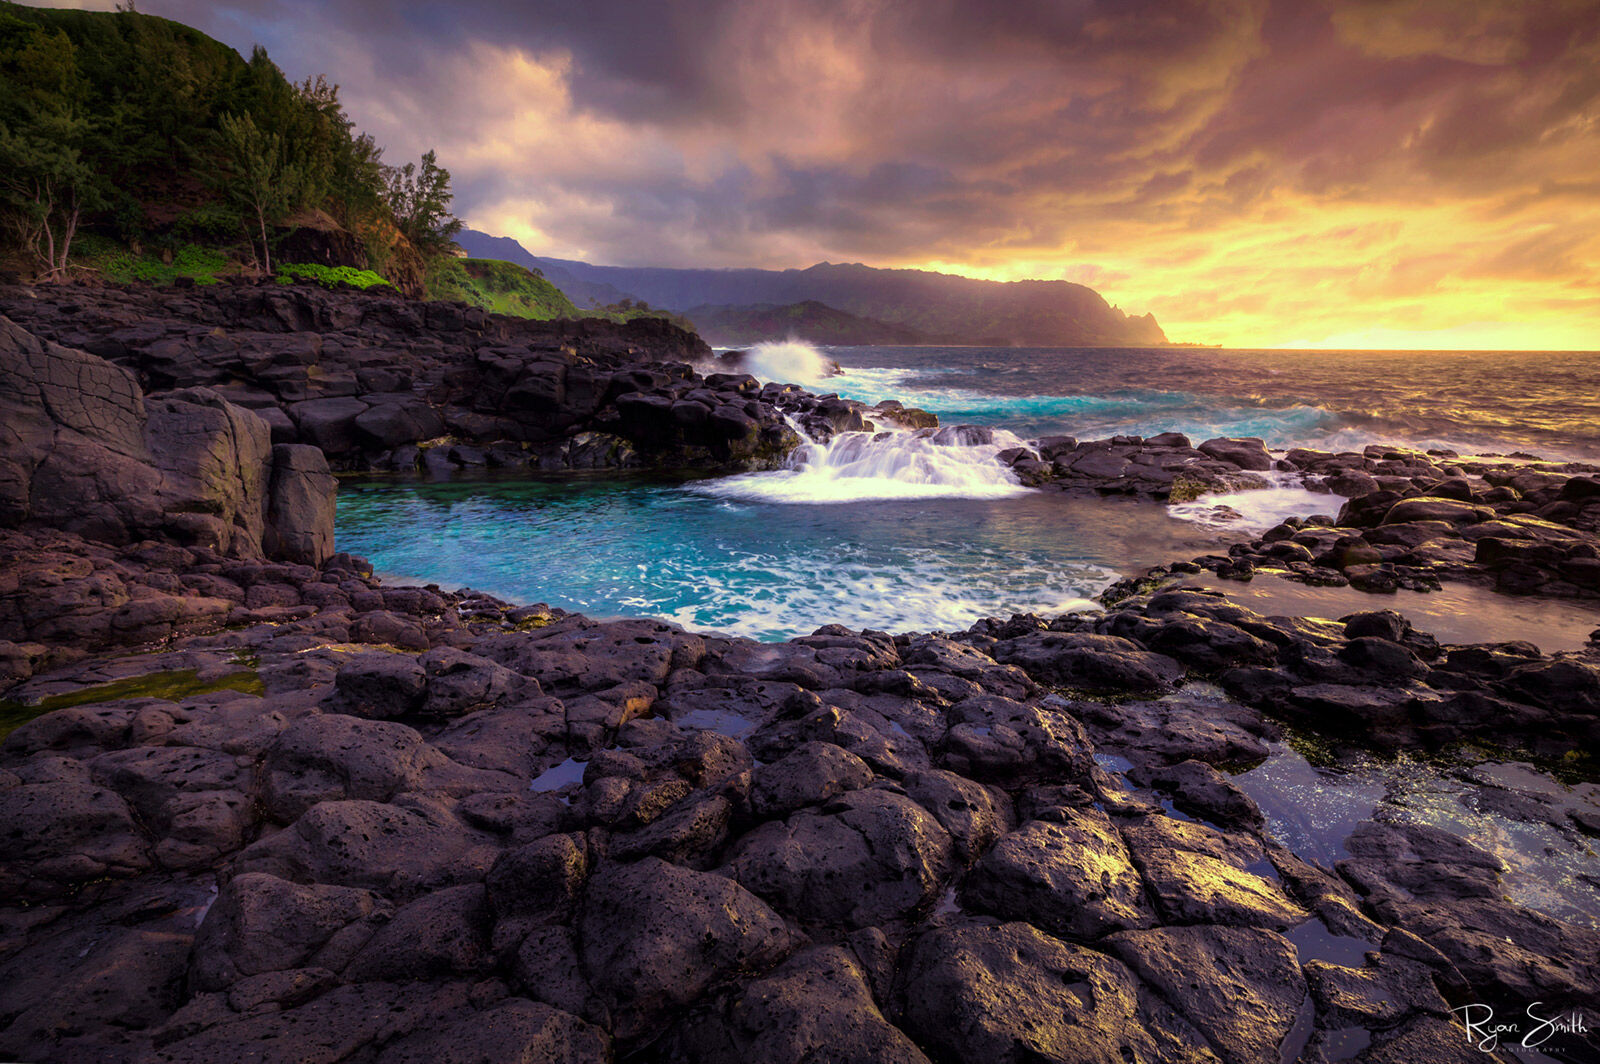 A rocky shore has a round pool with the ocean flowing in and the sun setting in the distance with an orange cloudy sky.